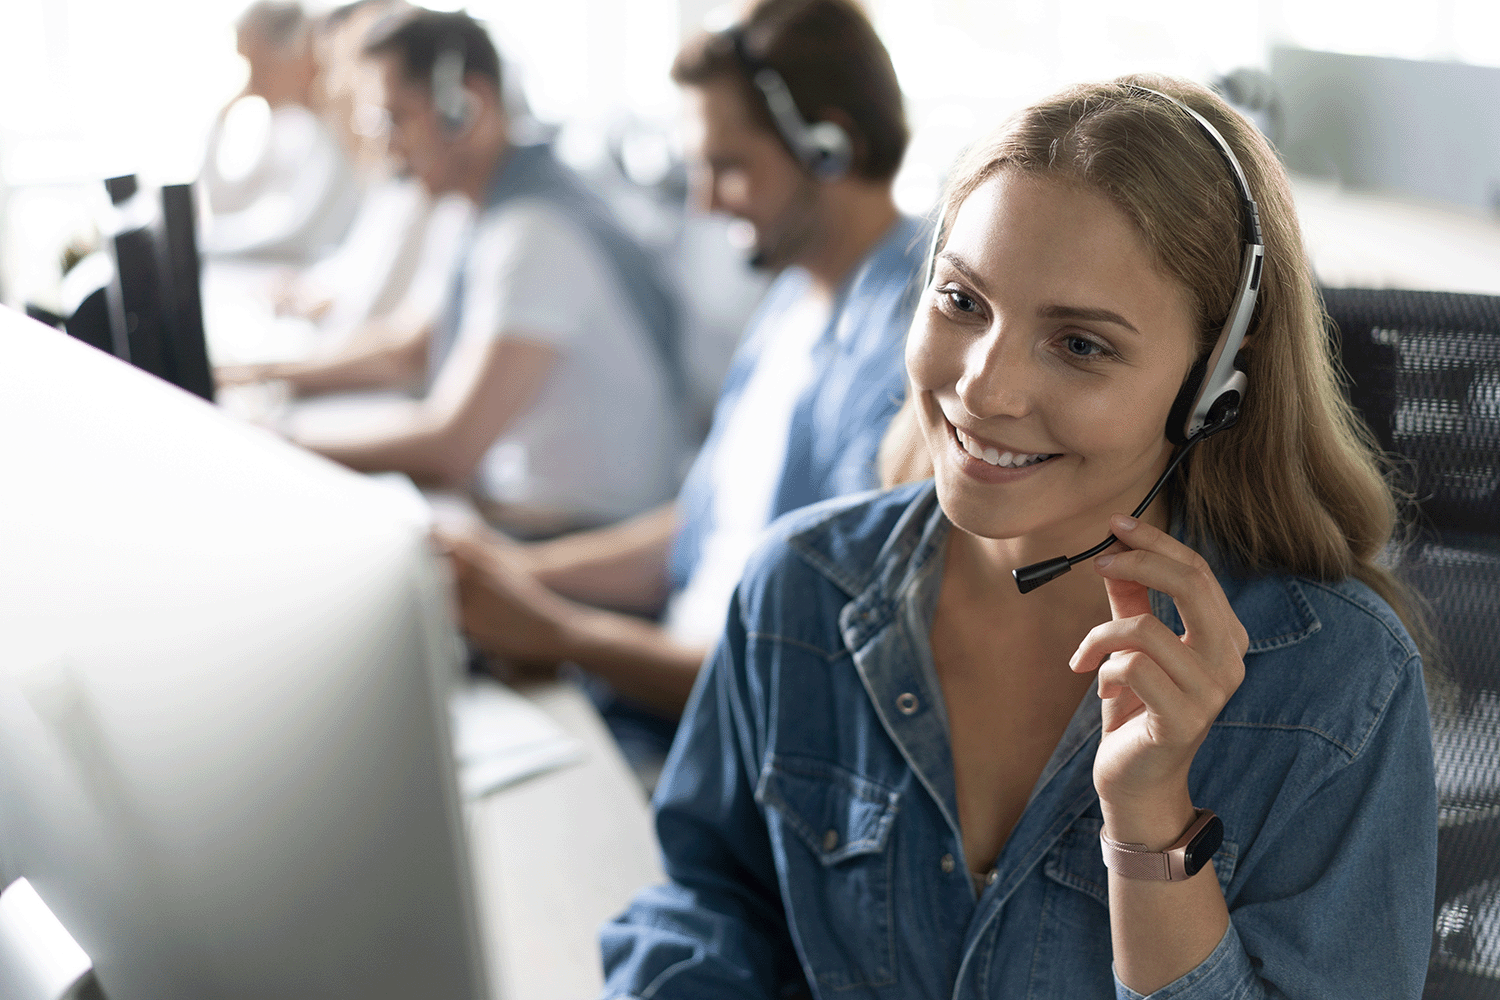 Global Contact Center for Tech Unicorn: Ramping for 5X Increase in Call Volumes